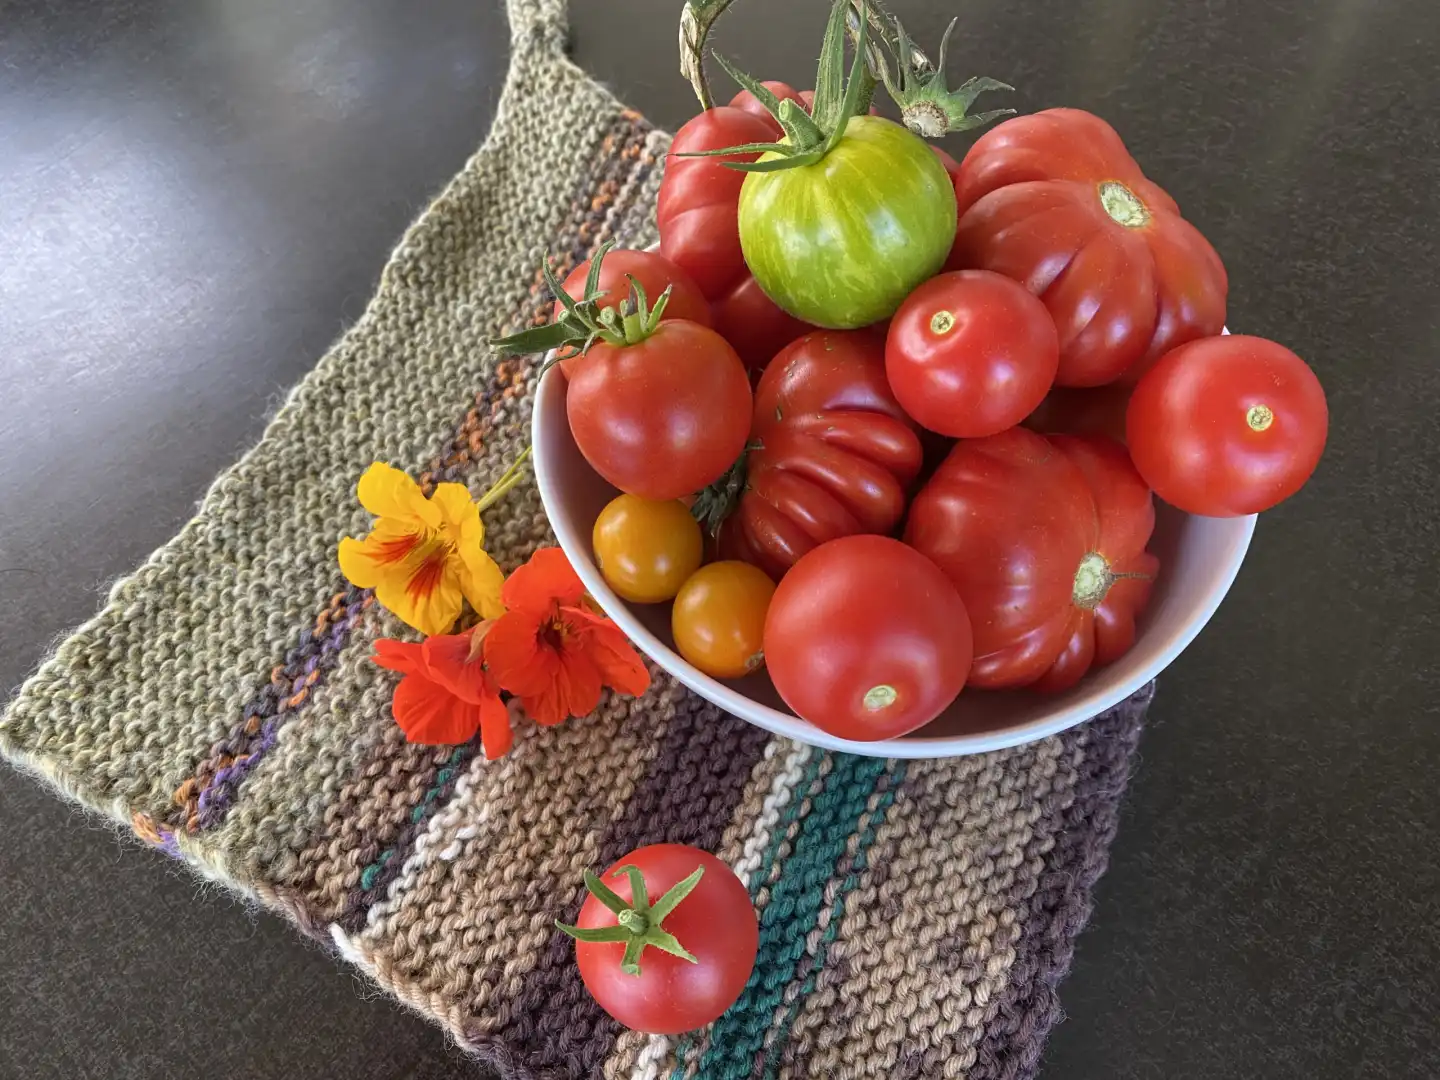 Freshly harvested organic tomatoes, different varieties of tomatoes from our own garden.